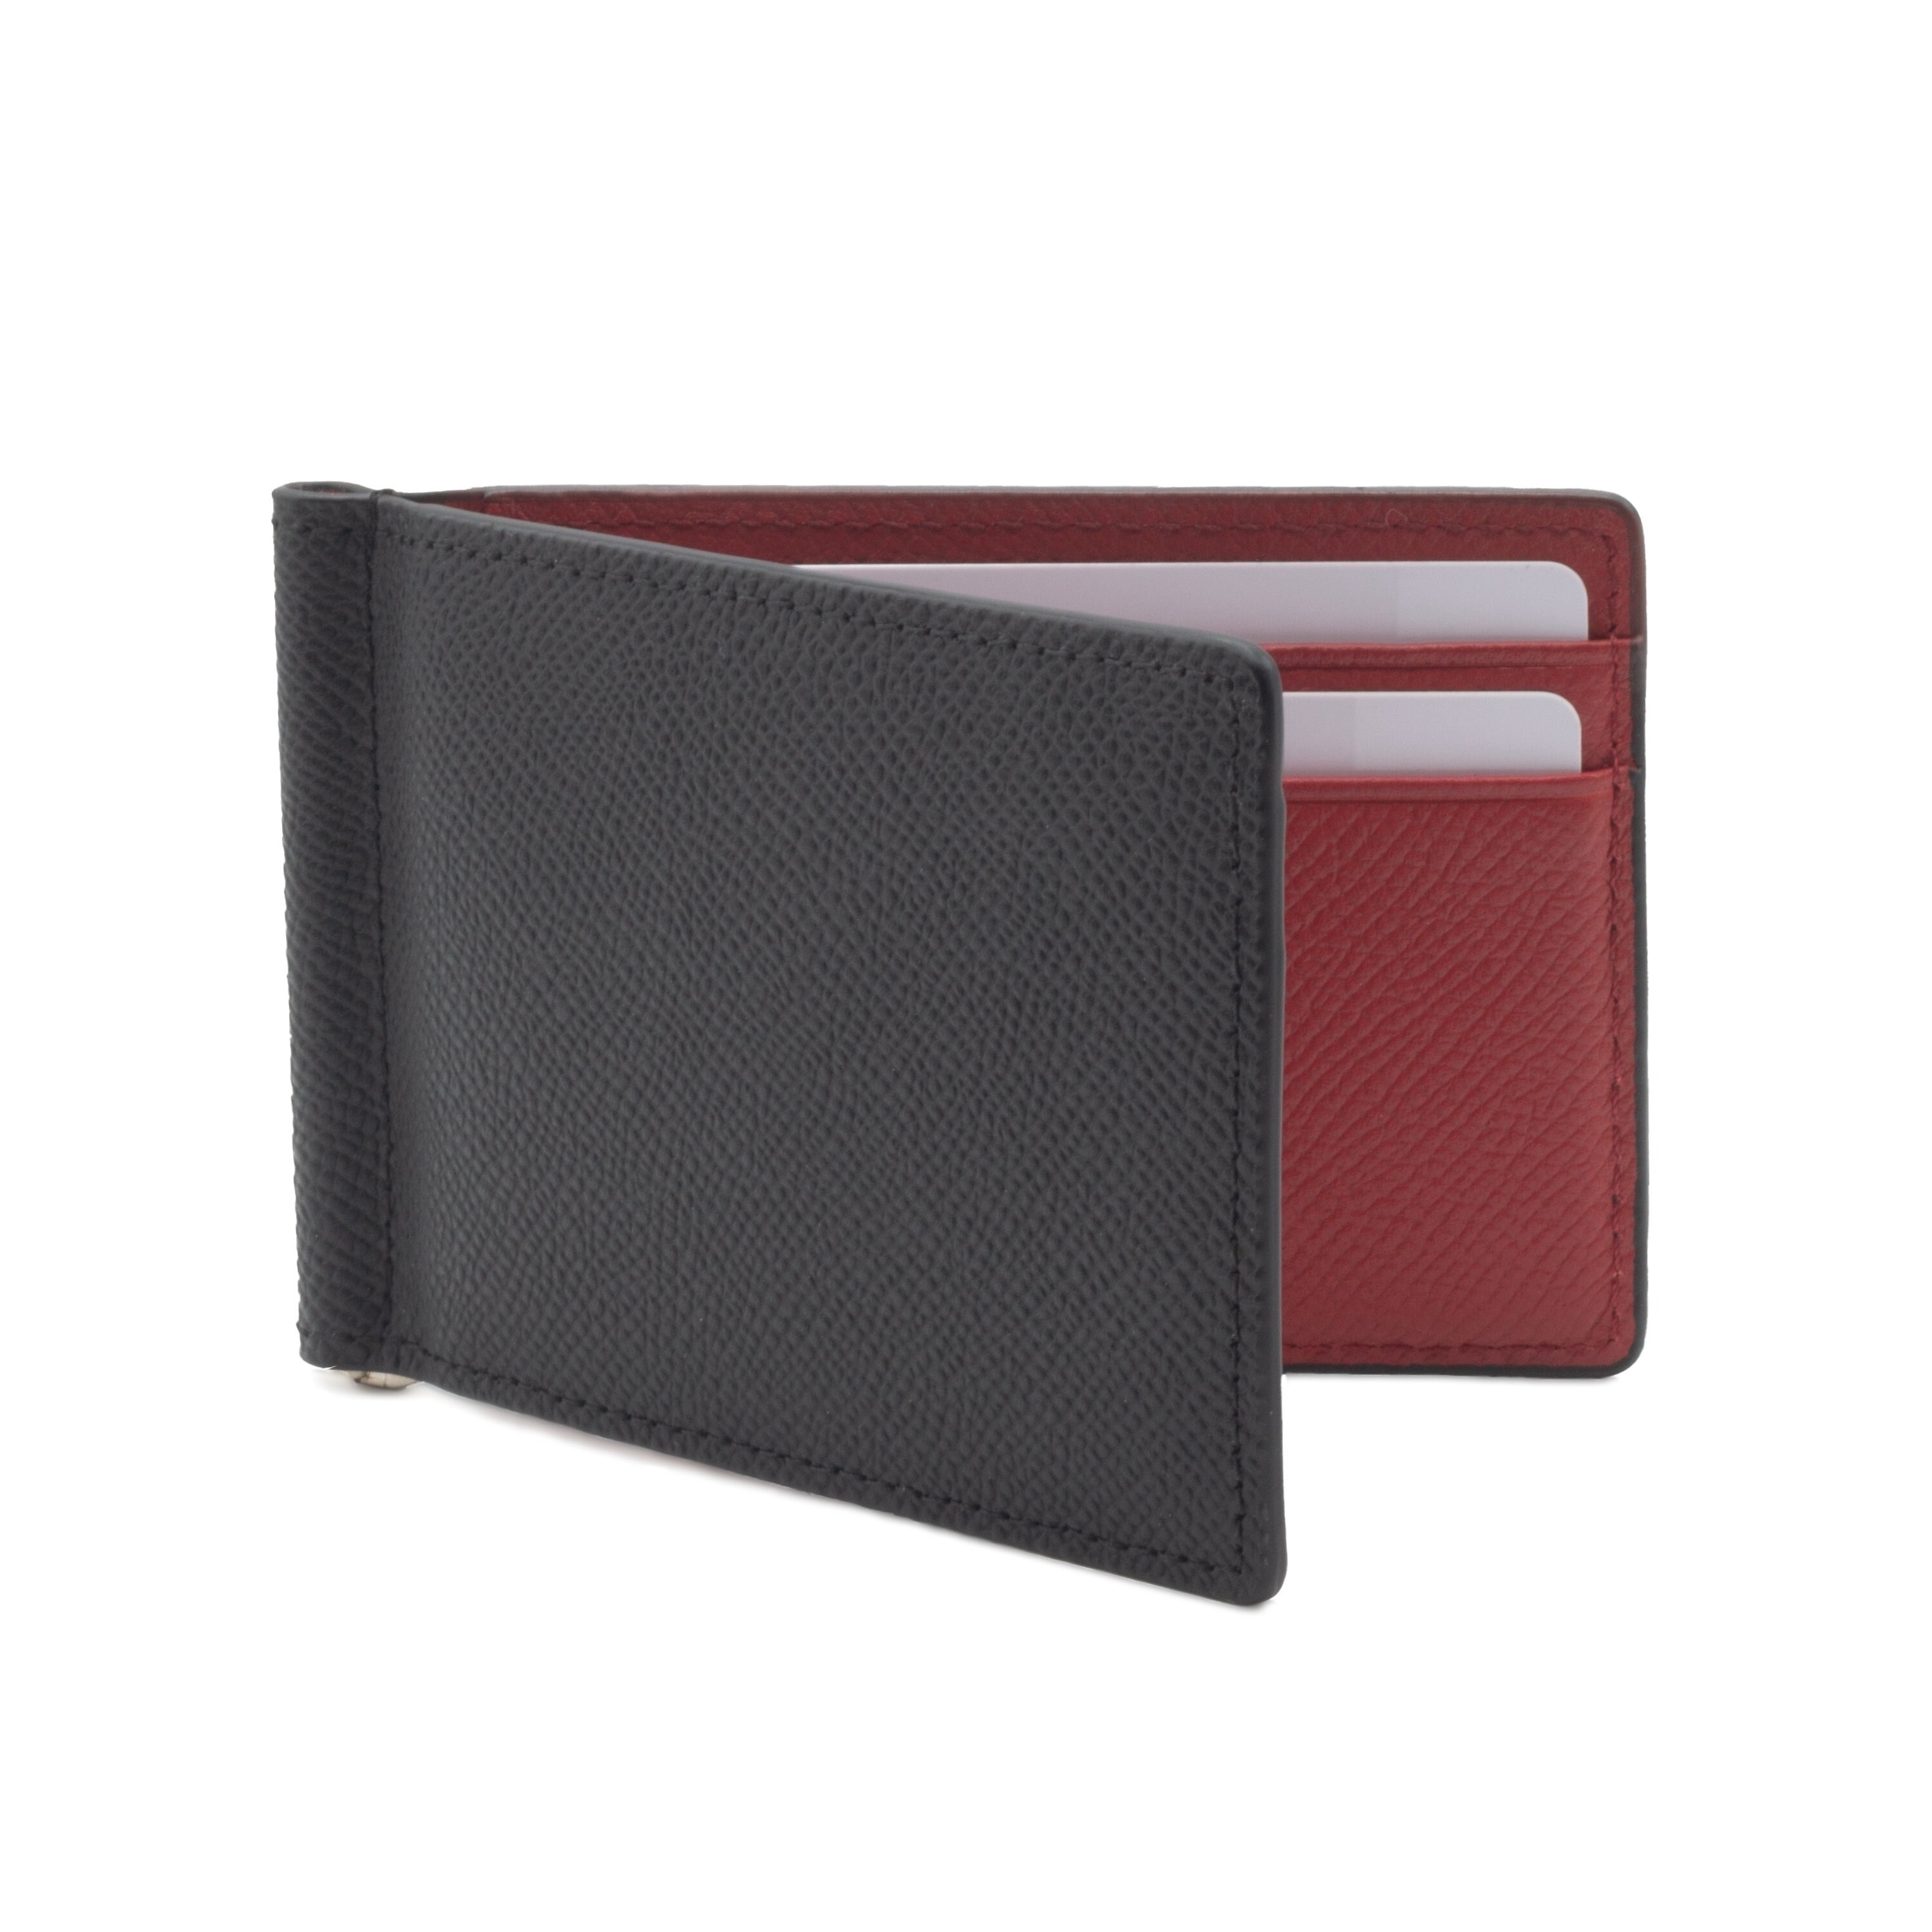 The Tanned Cow Super Slim Bifold Wallet Genuine Leather Minimalist ...